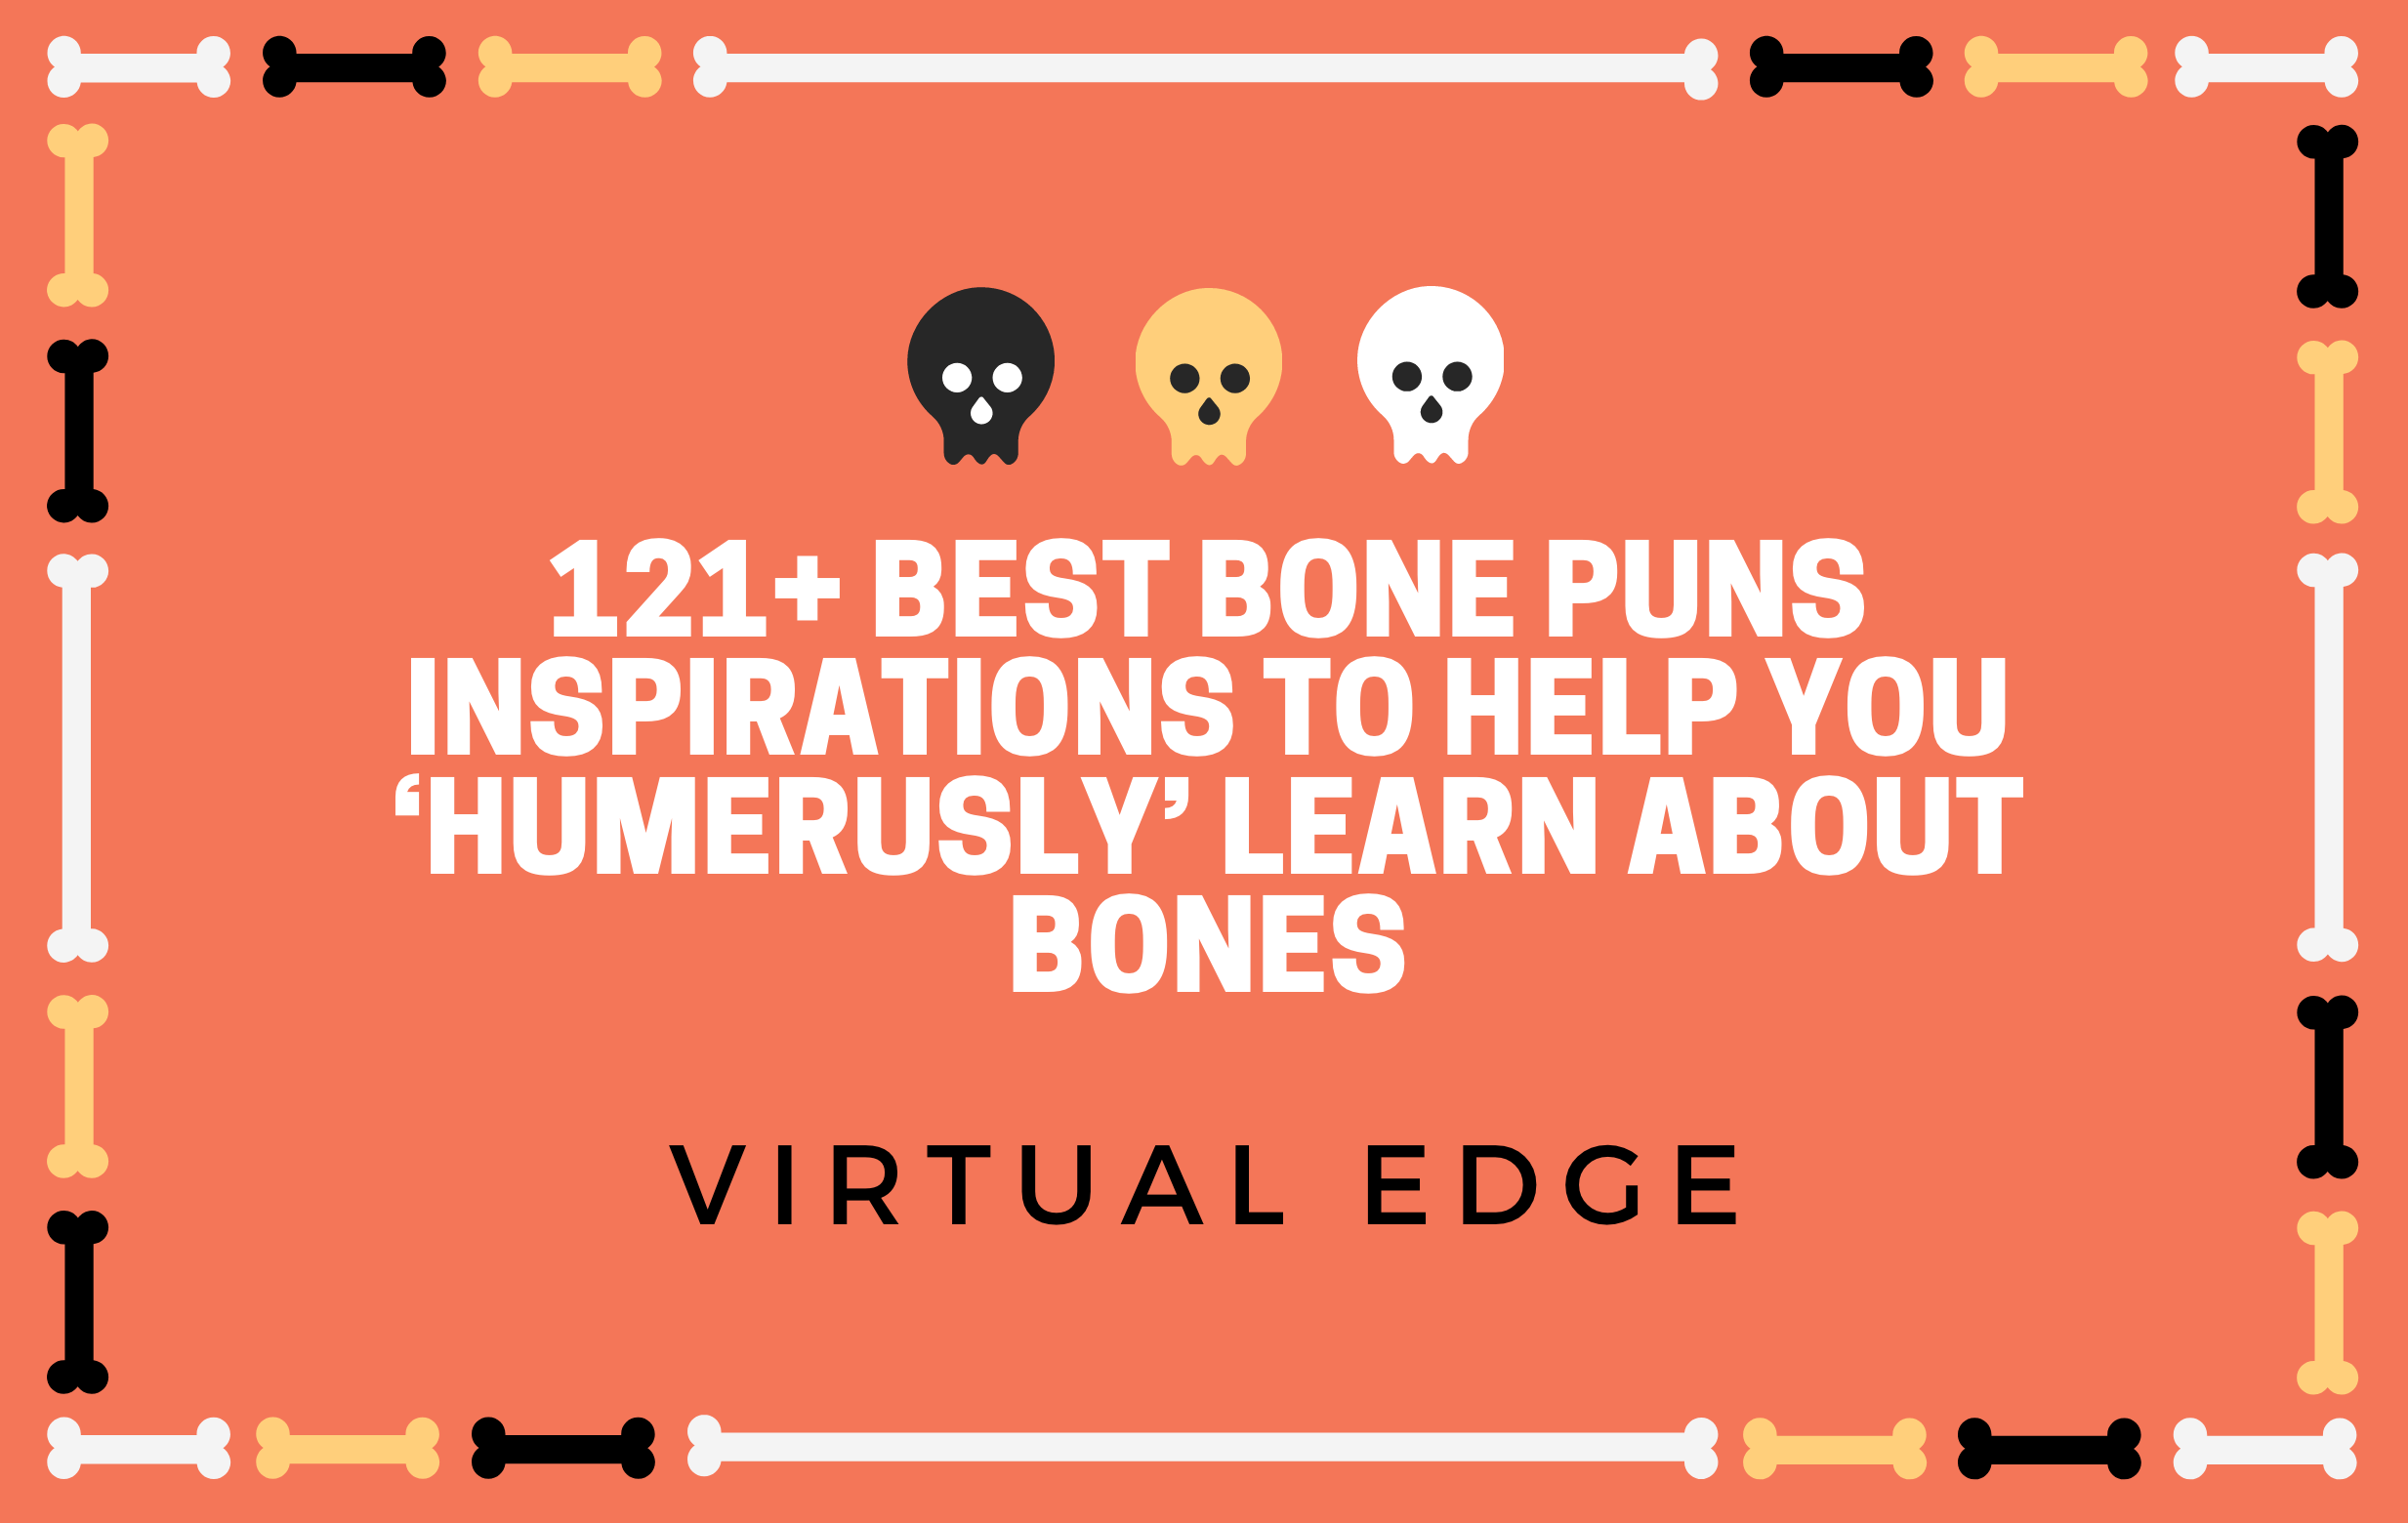 121+ Best Bone Puns Inspirations to Help You ‘Humerusly’ Learn about Bones